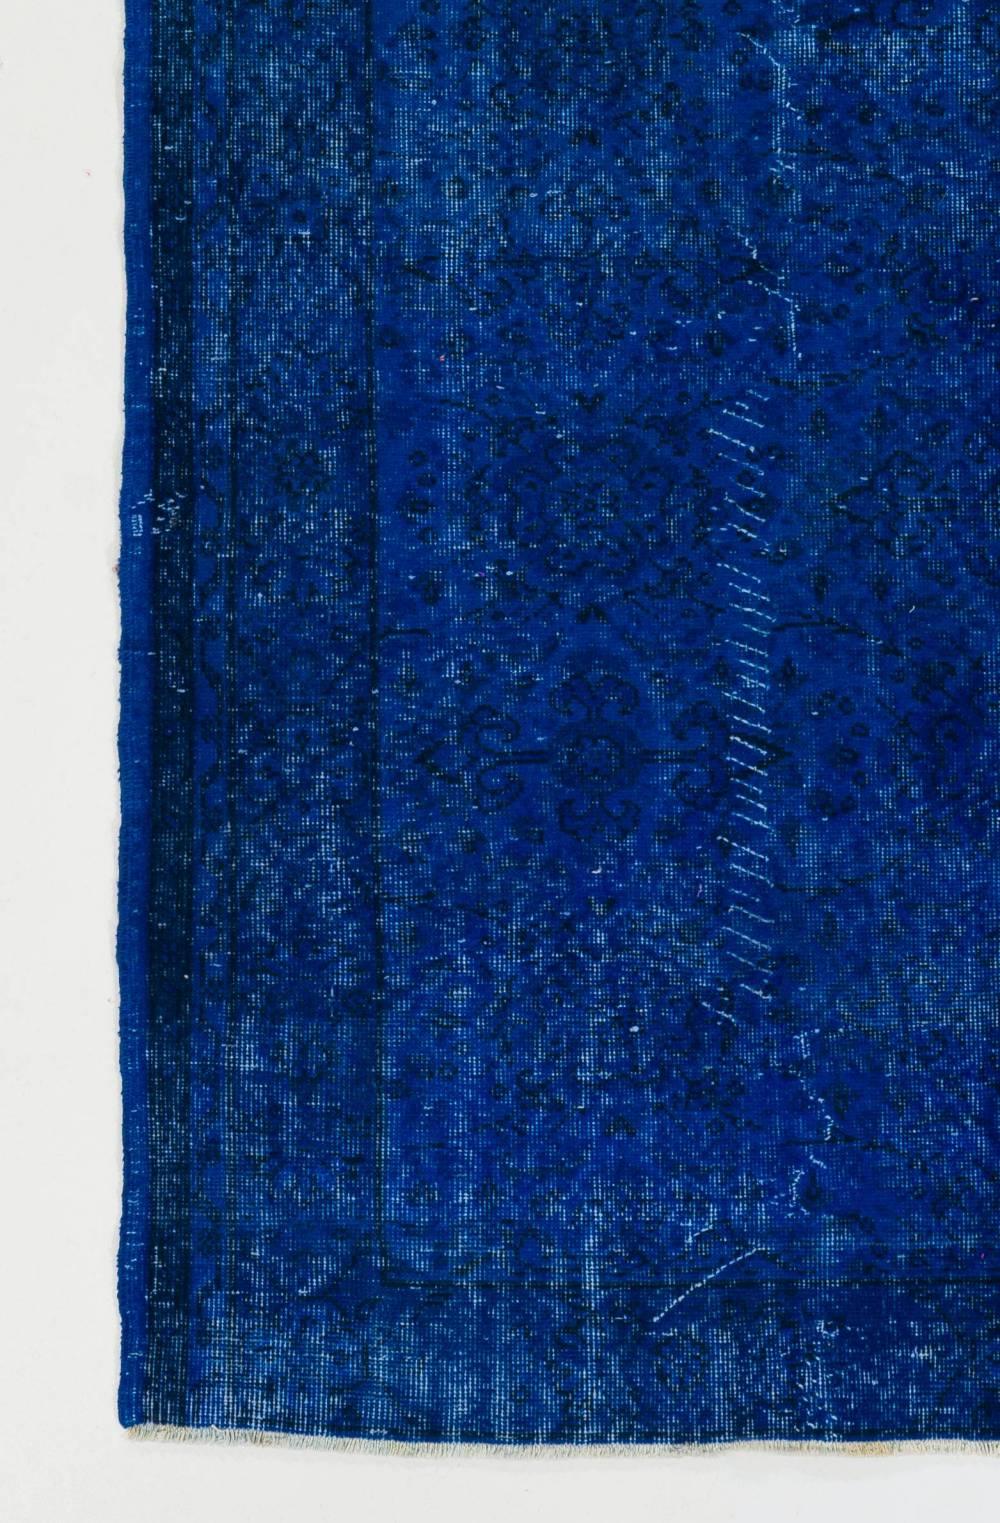 Hand-Woven Vintage Rug Over-Dyed in Blue Color, 5.5x8.7 Ft Great for Contemporary Interiors